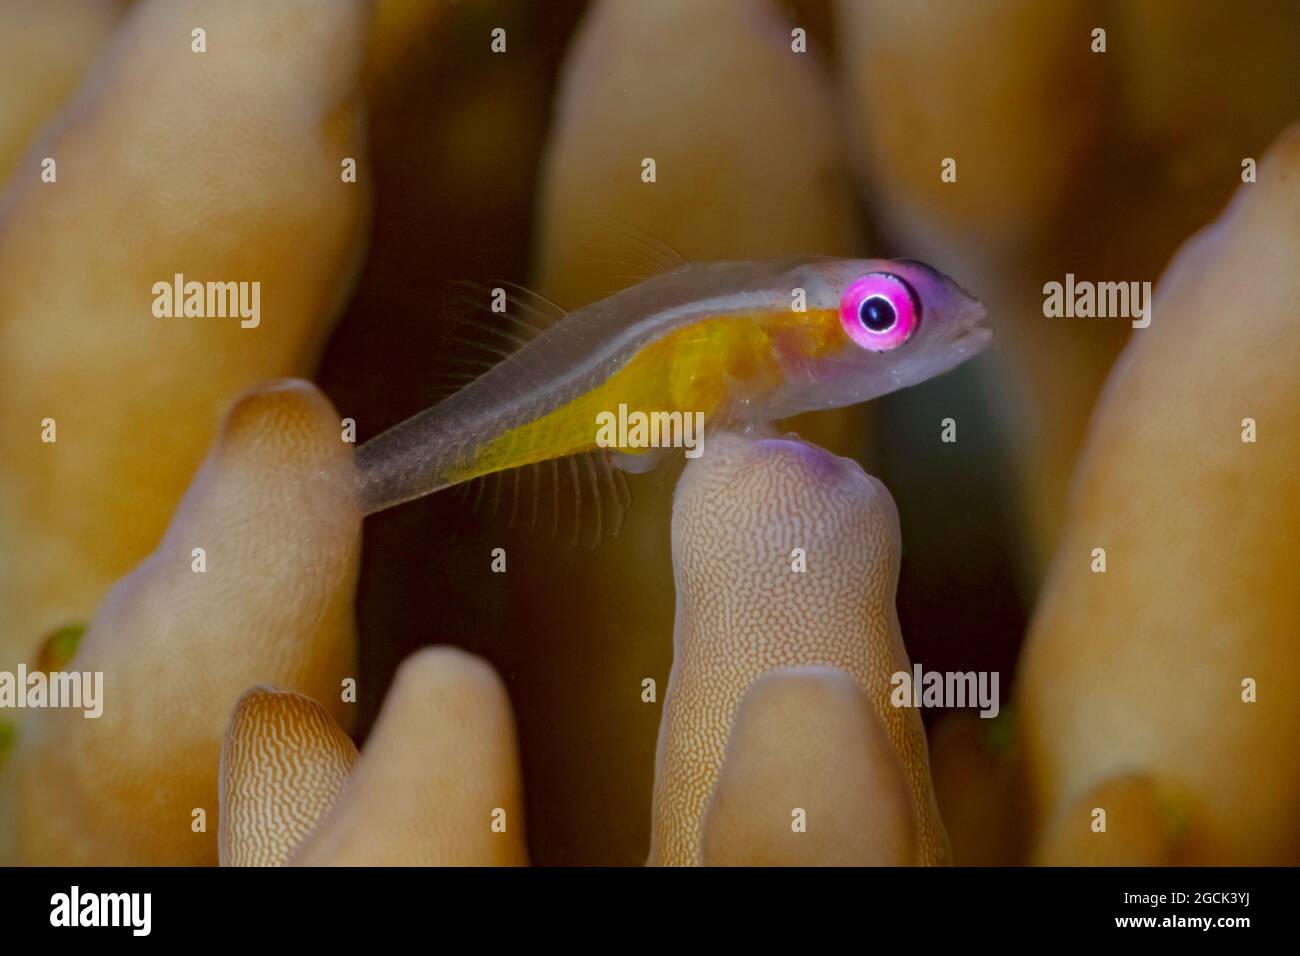 Closeup of small exotic tropical marine Bryaninops natans or Redeye goby fish swimming among coral reefs undersea Stock Photo